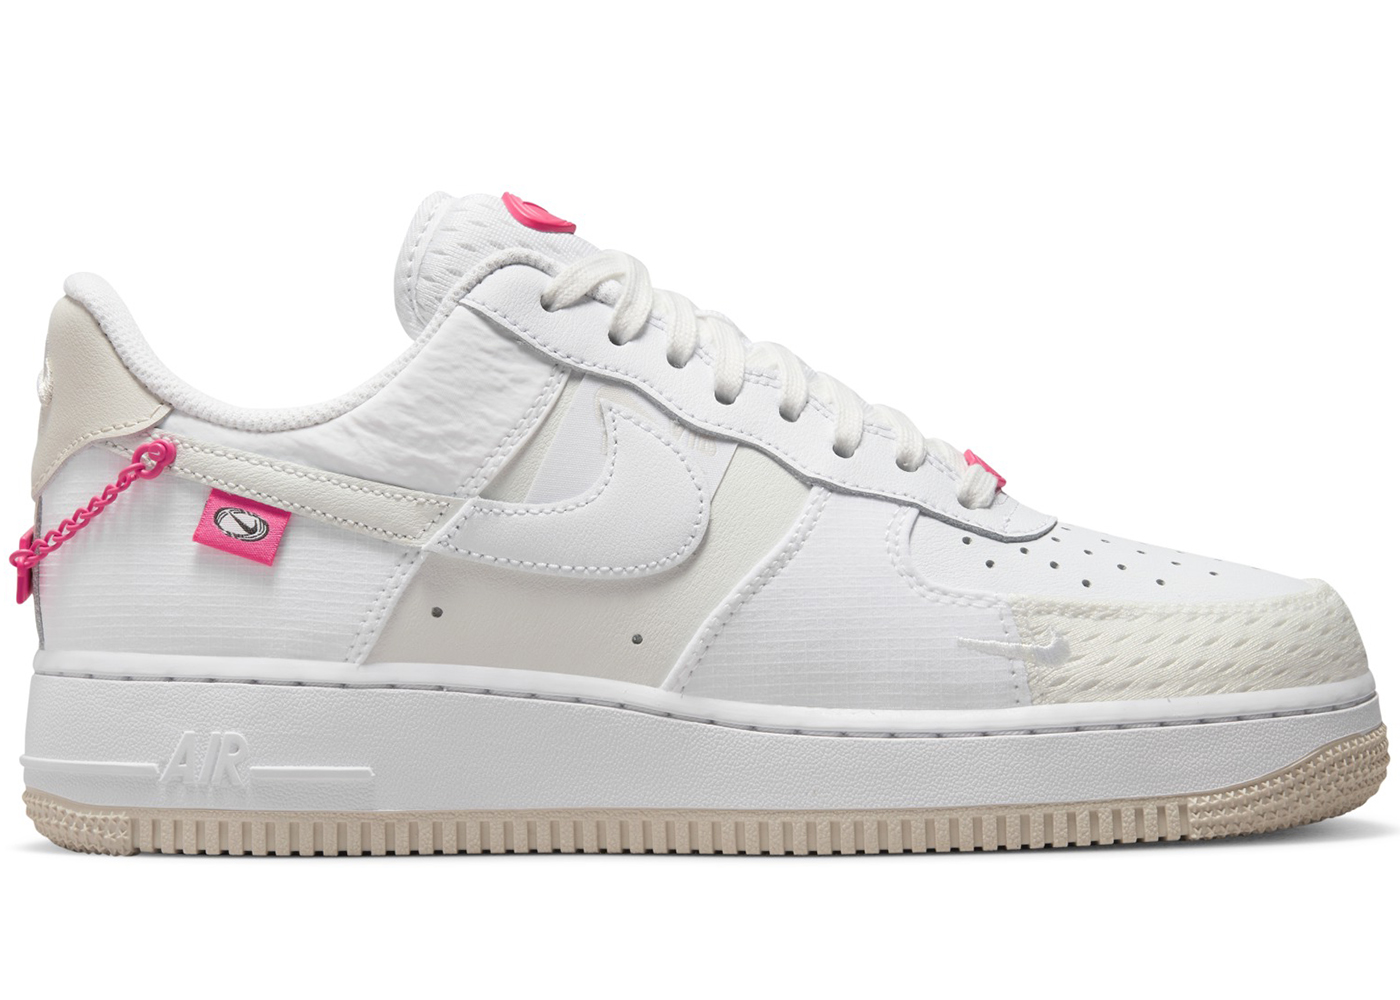 Nike Air Force 1 Low '07 LX Pink Bling (Women's)